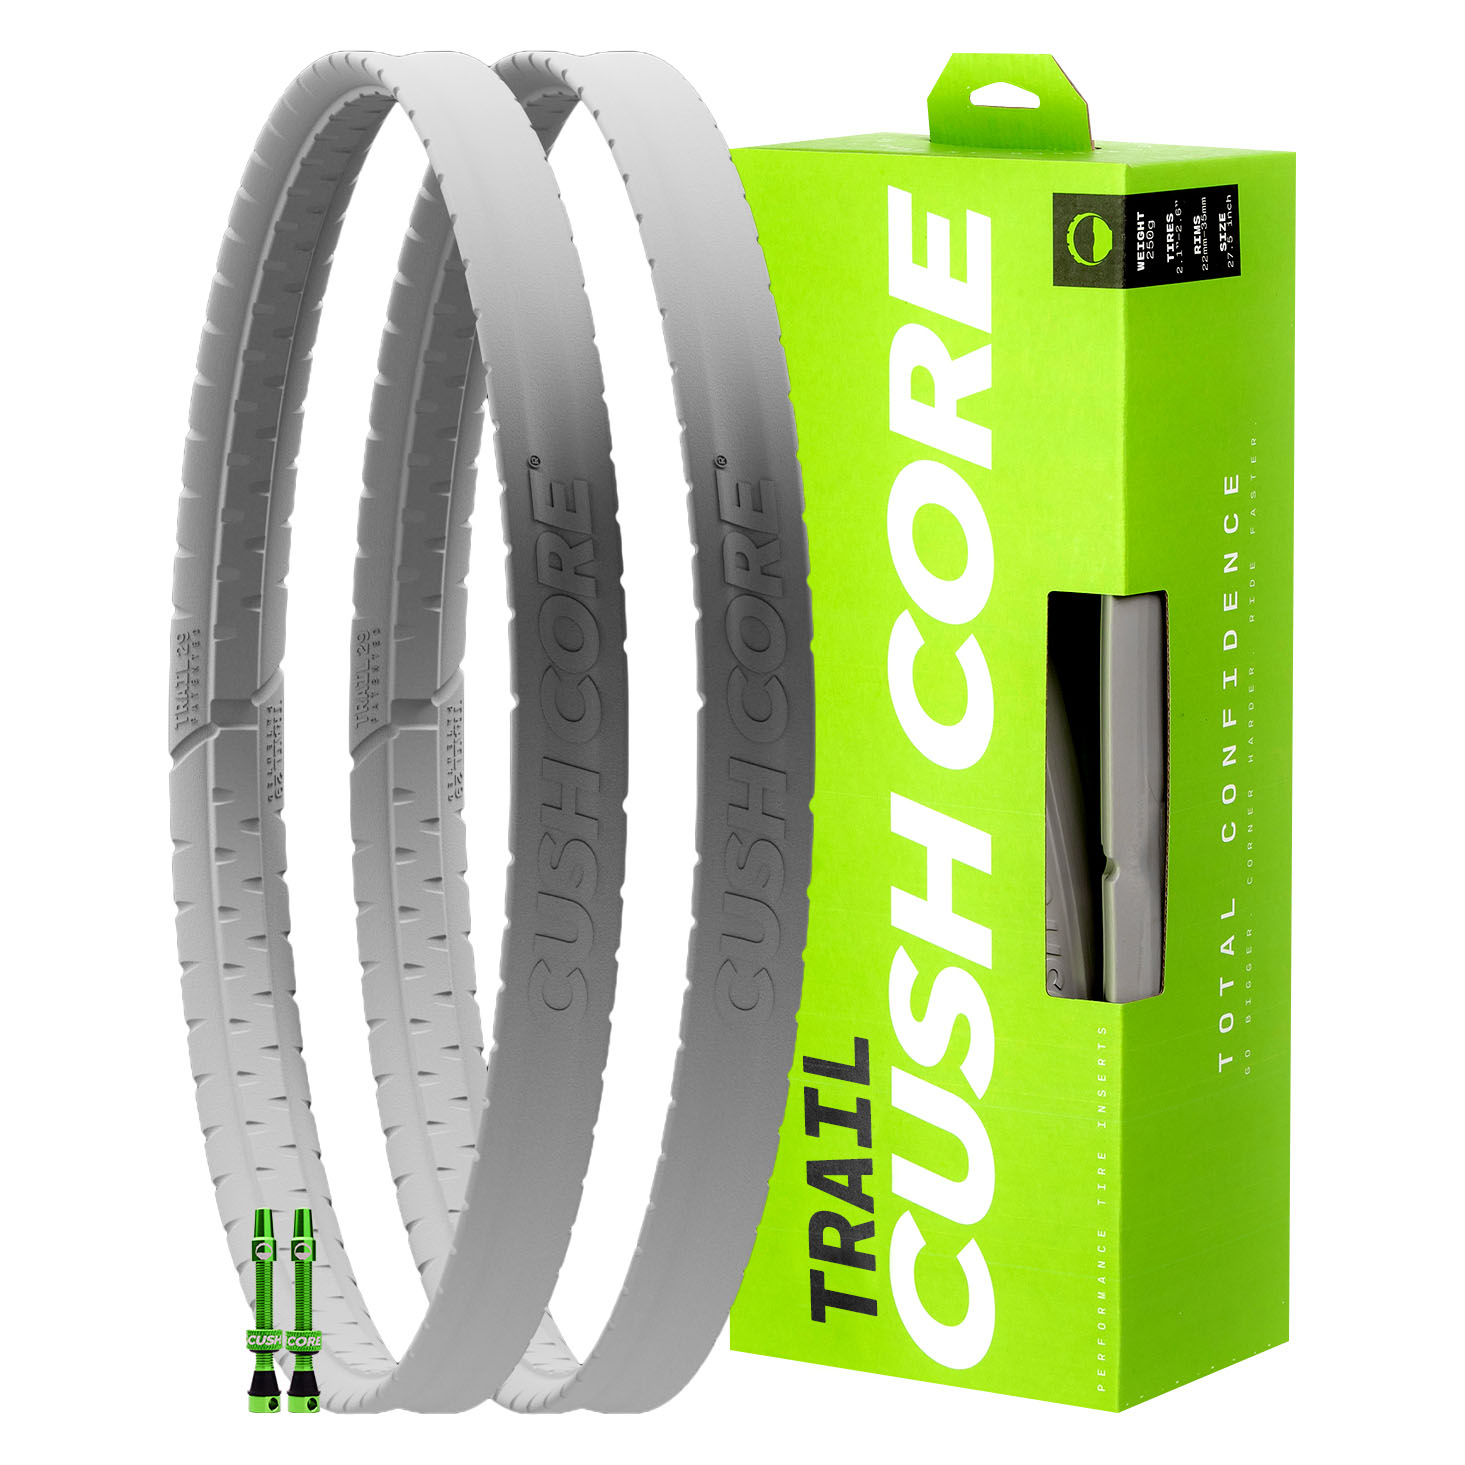 Cush Core Trail Tire Insert, Mixed 27.5"/29", Set with Valves